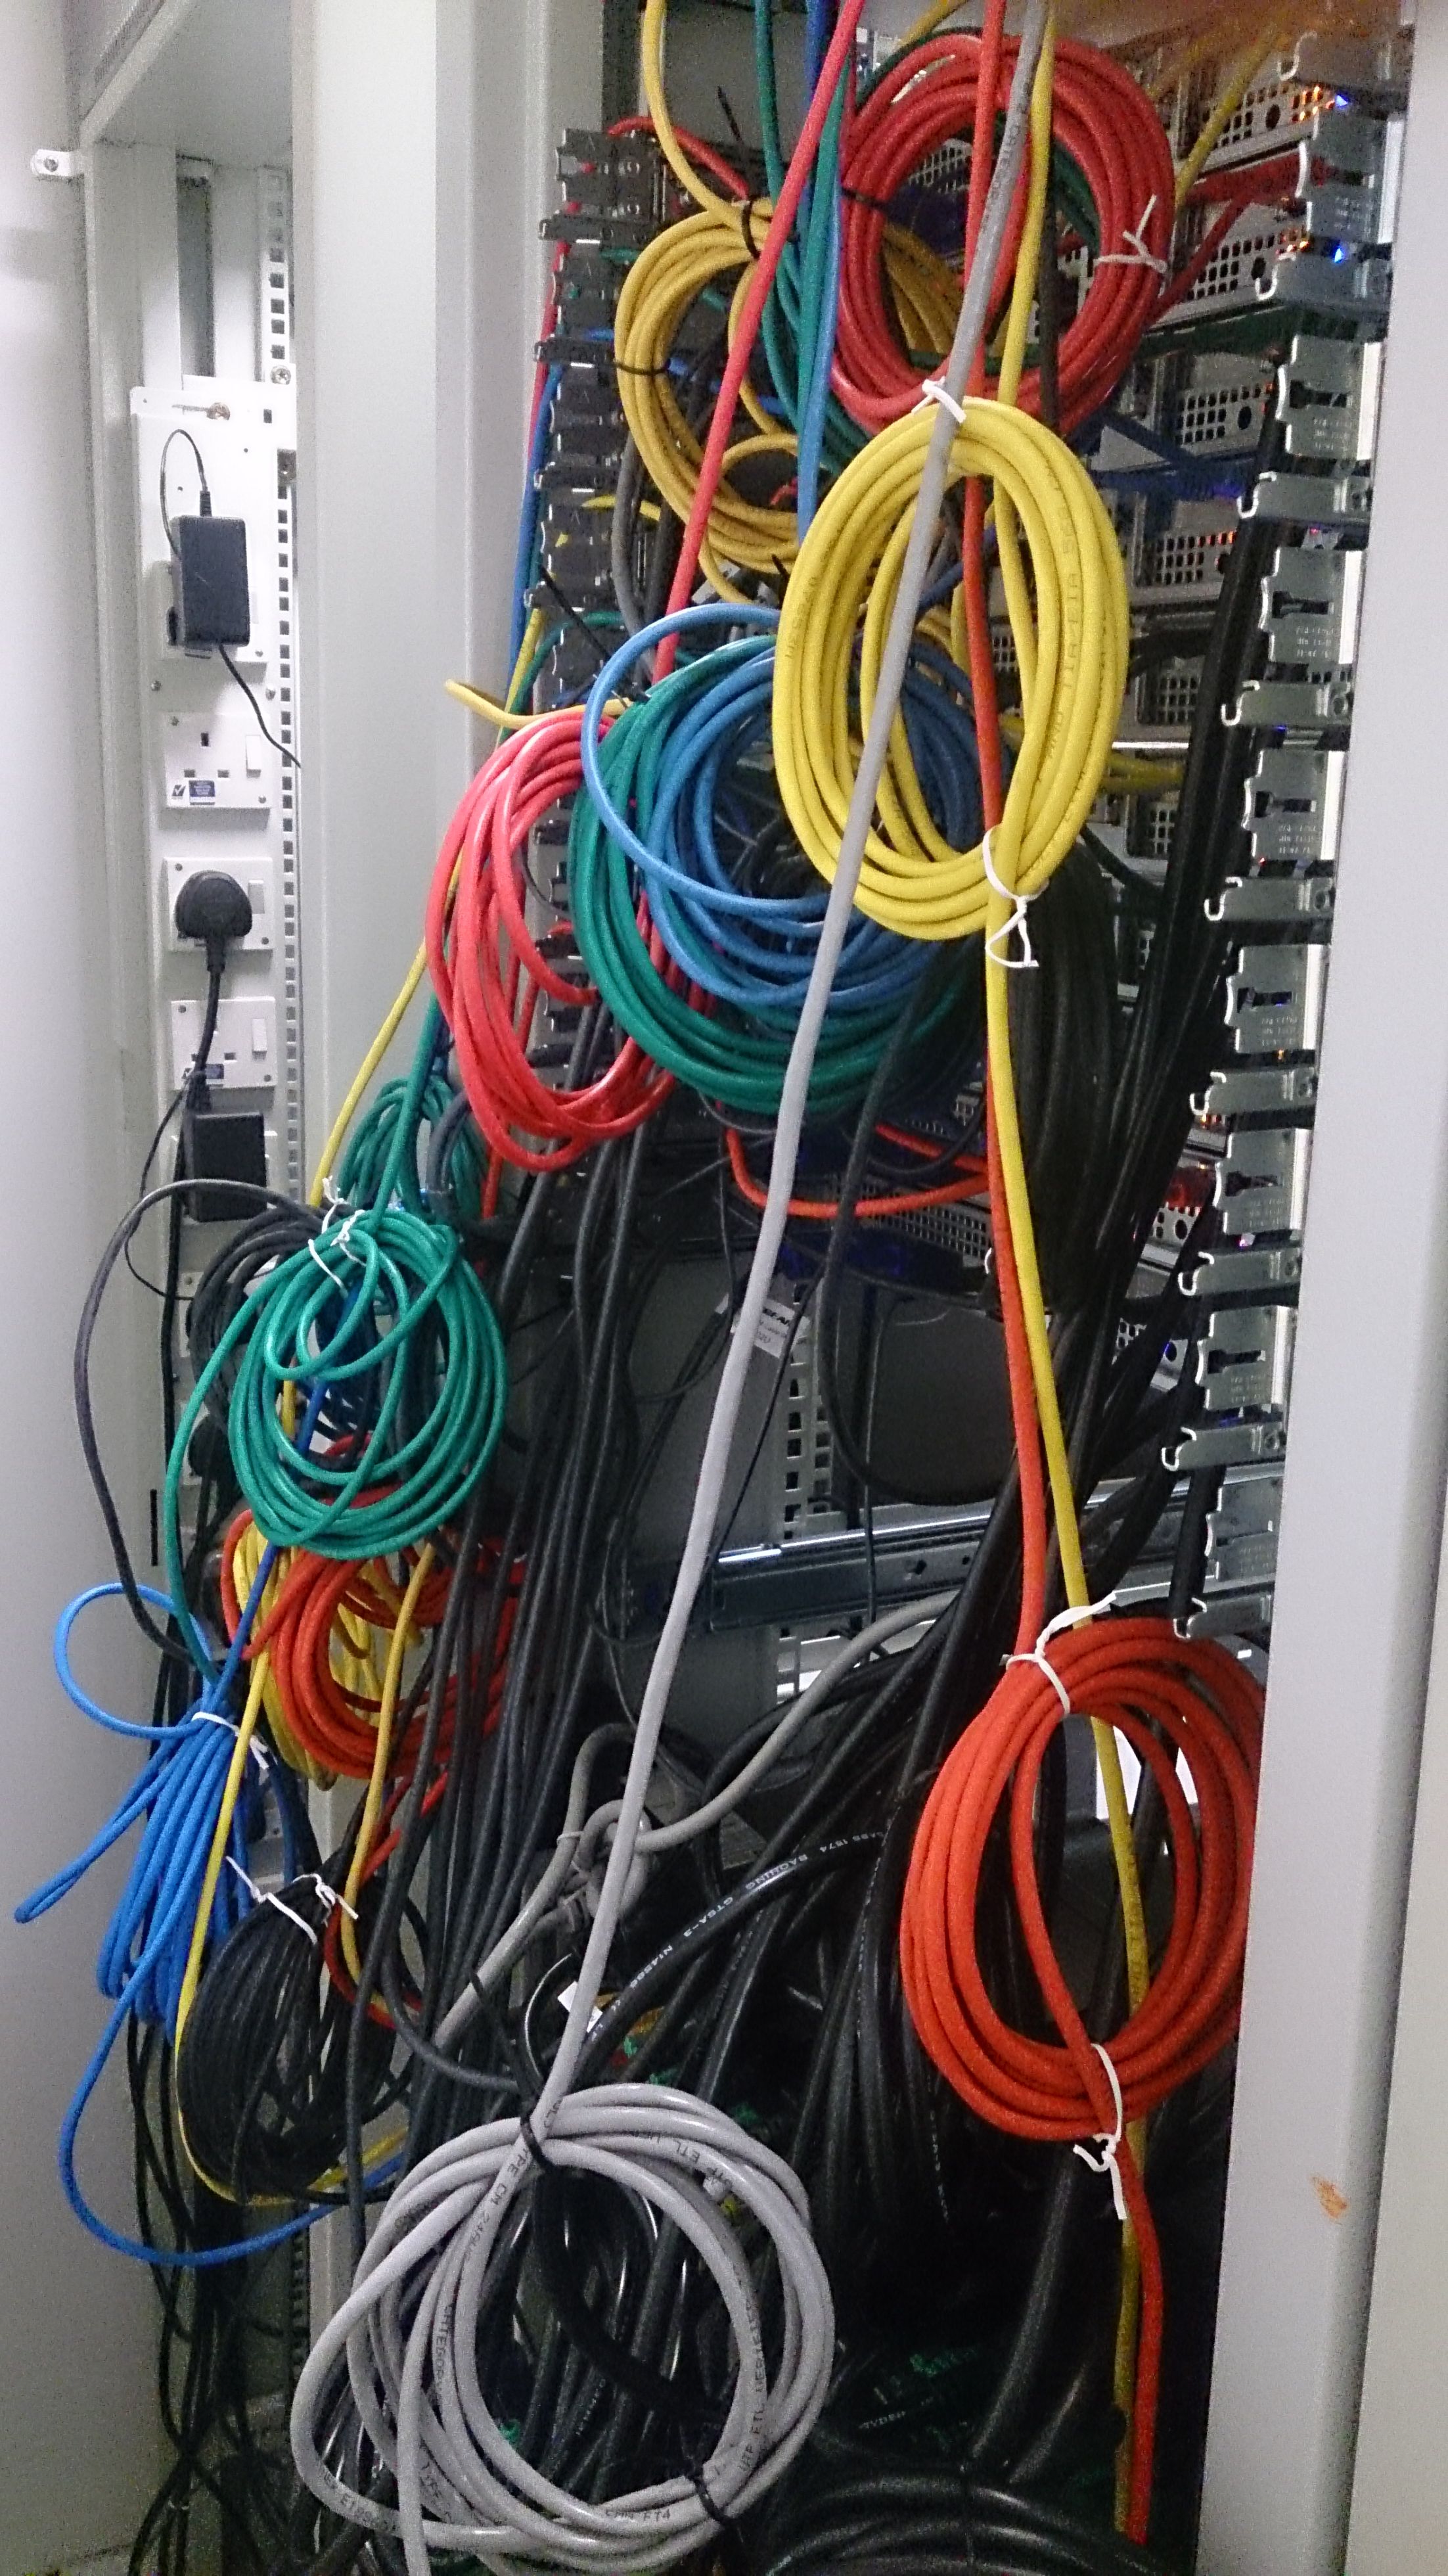 Server room and internet cables.